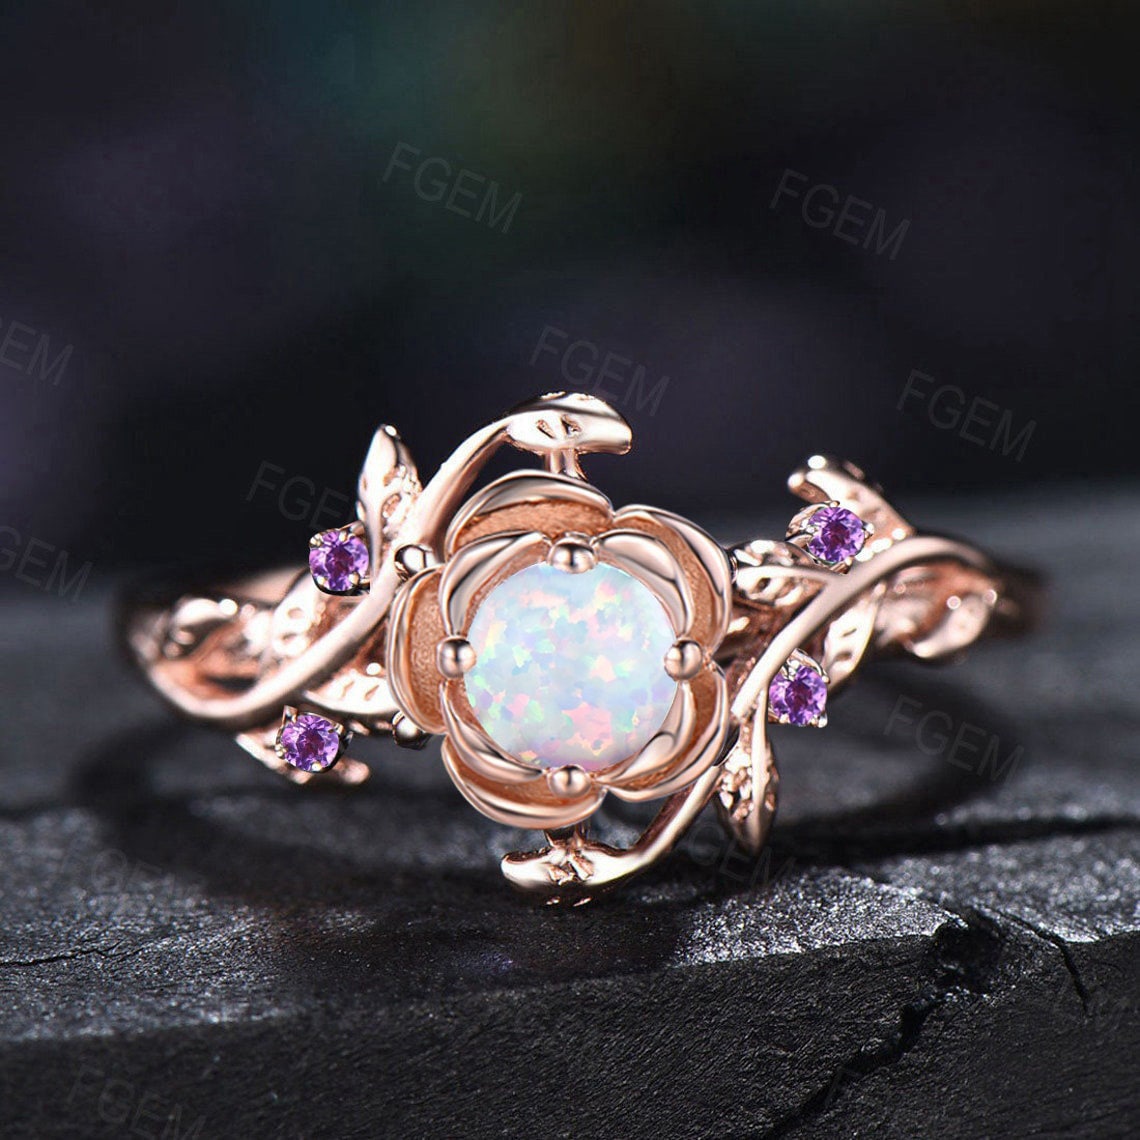 Rose Flower Engagement Ring Round Cut White Opal Wedding Ring Floral Opal Ring Nature Inspired Leaf Amethyst Ring October Birthstone Gift